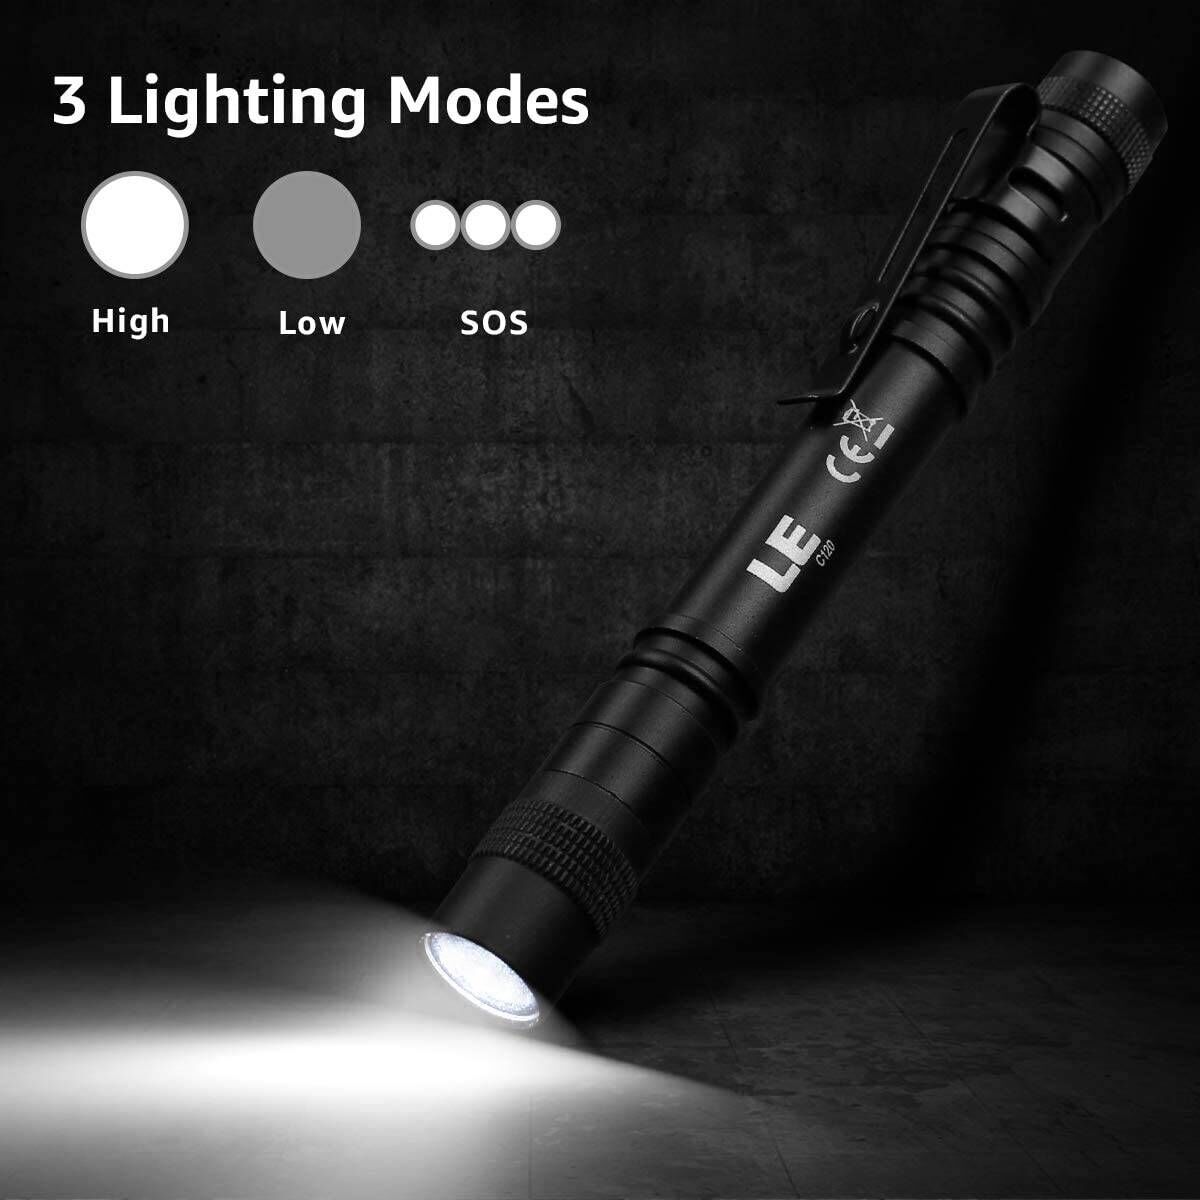 Packs Compact LED Penlights: Water-Resistant, Pocket-Sized Flashlights  with Clips for Work, Inspections,  Emergencies